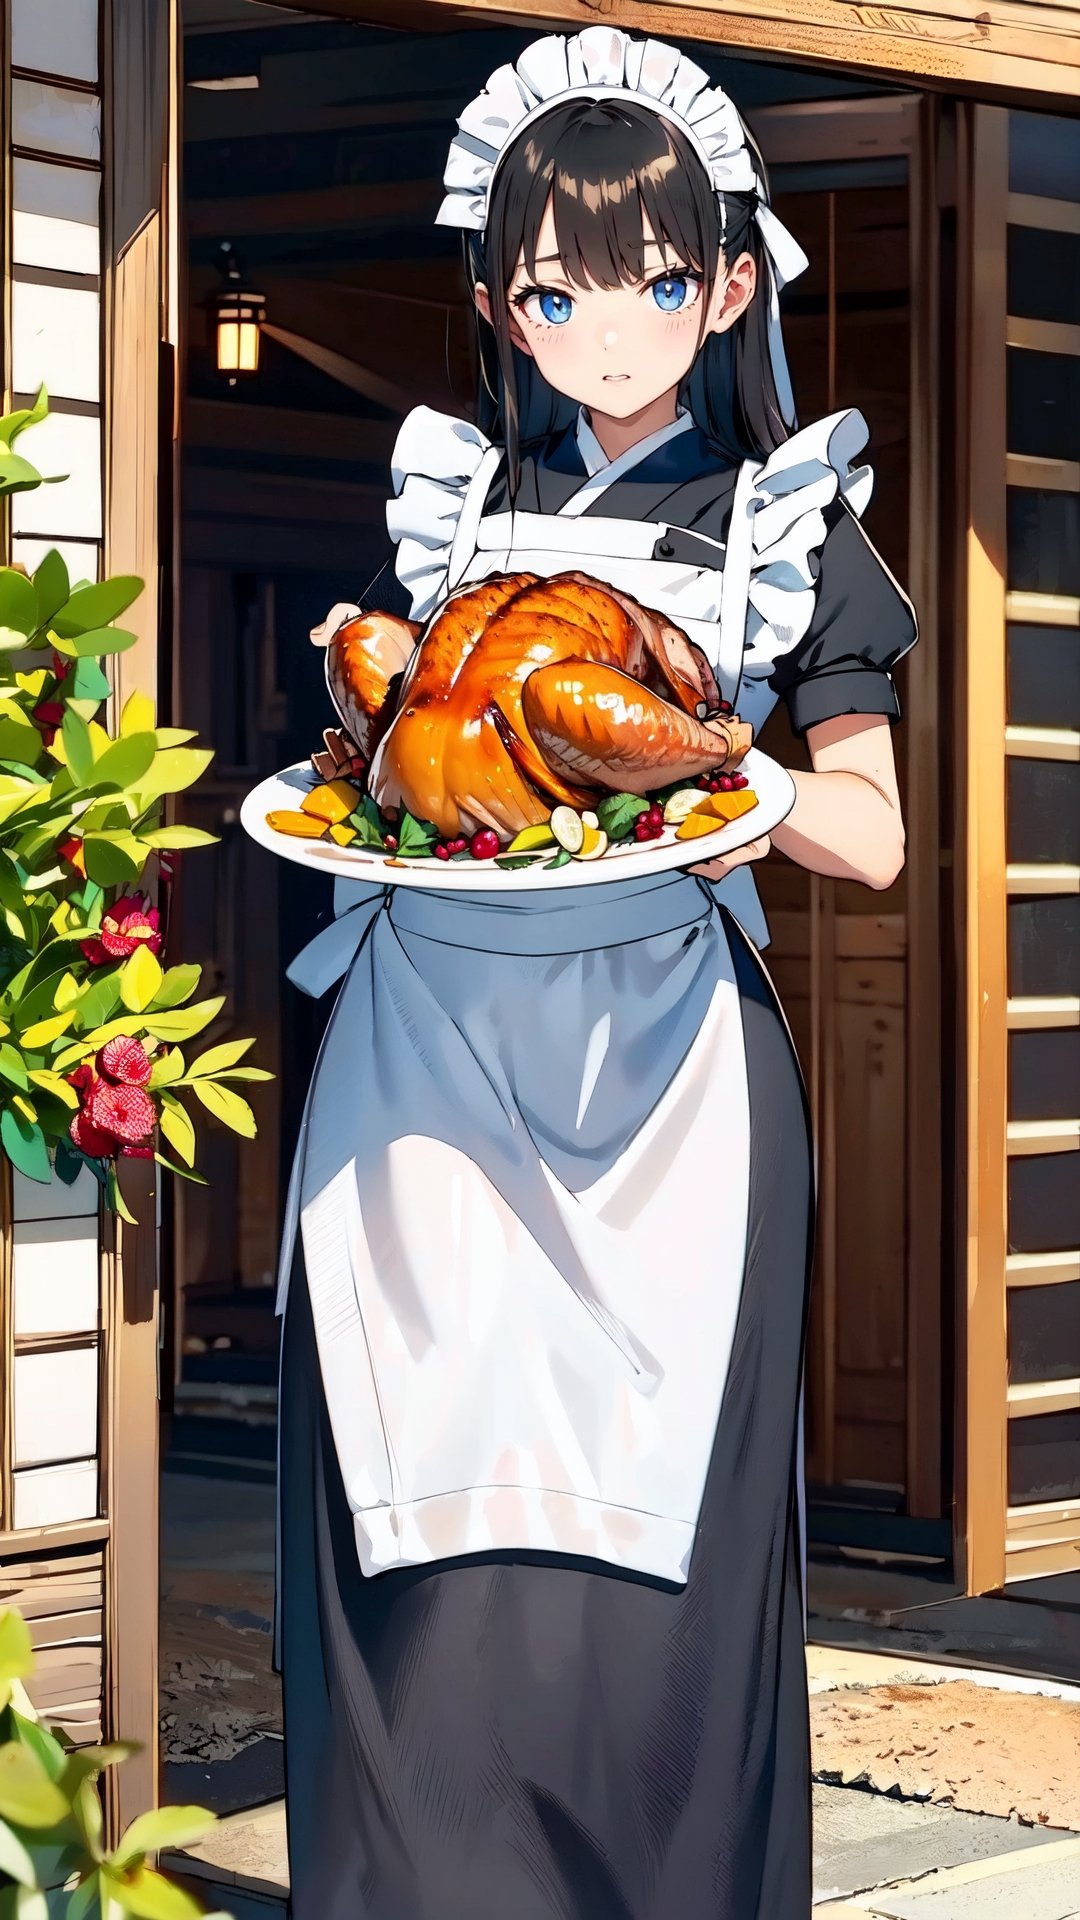 maid carries a plate of Thanksgiving turkey,Japanese girl